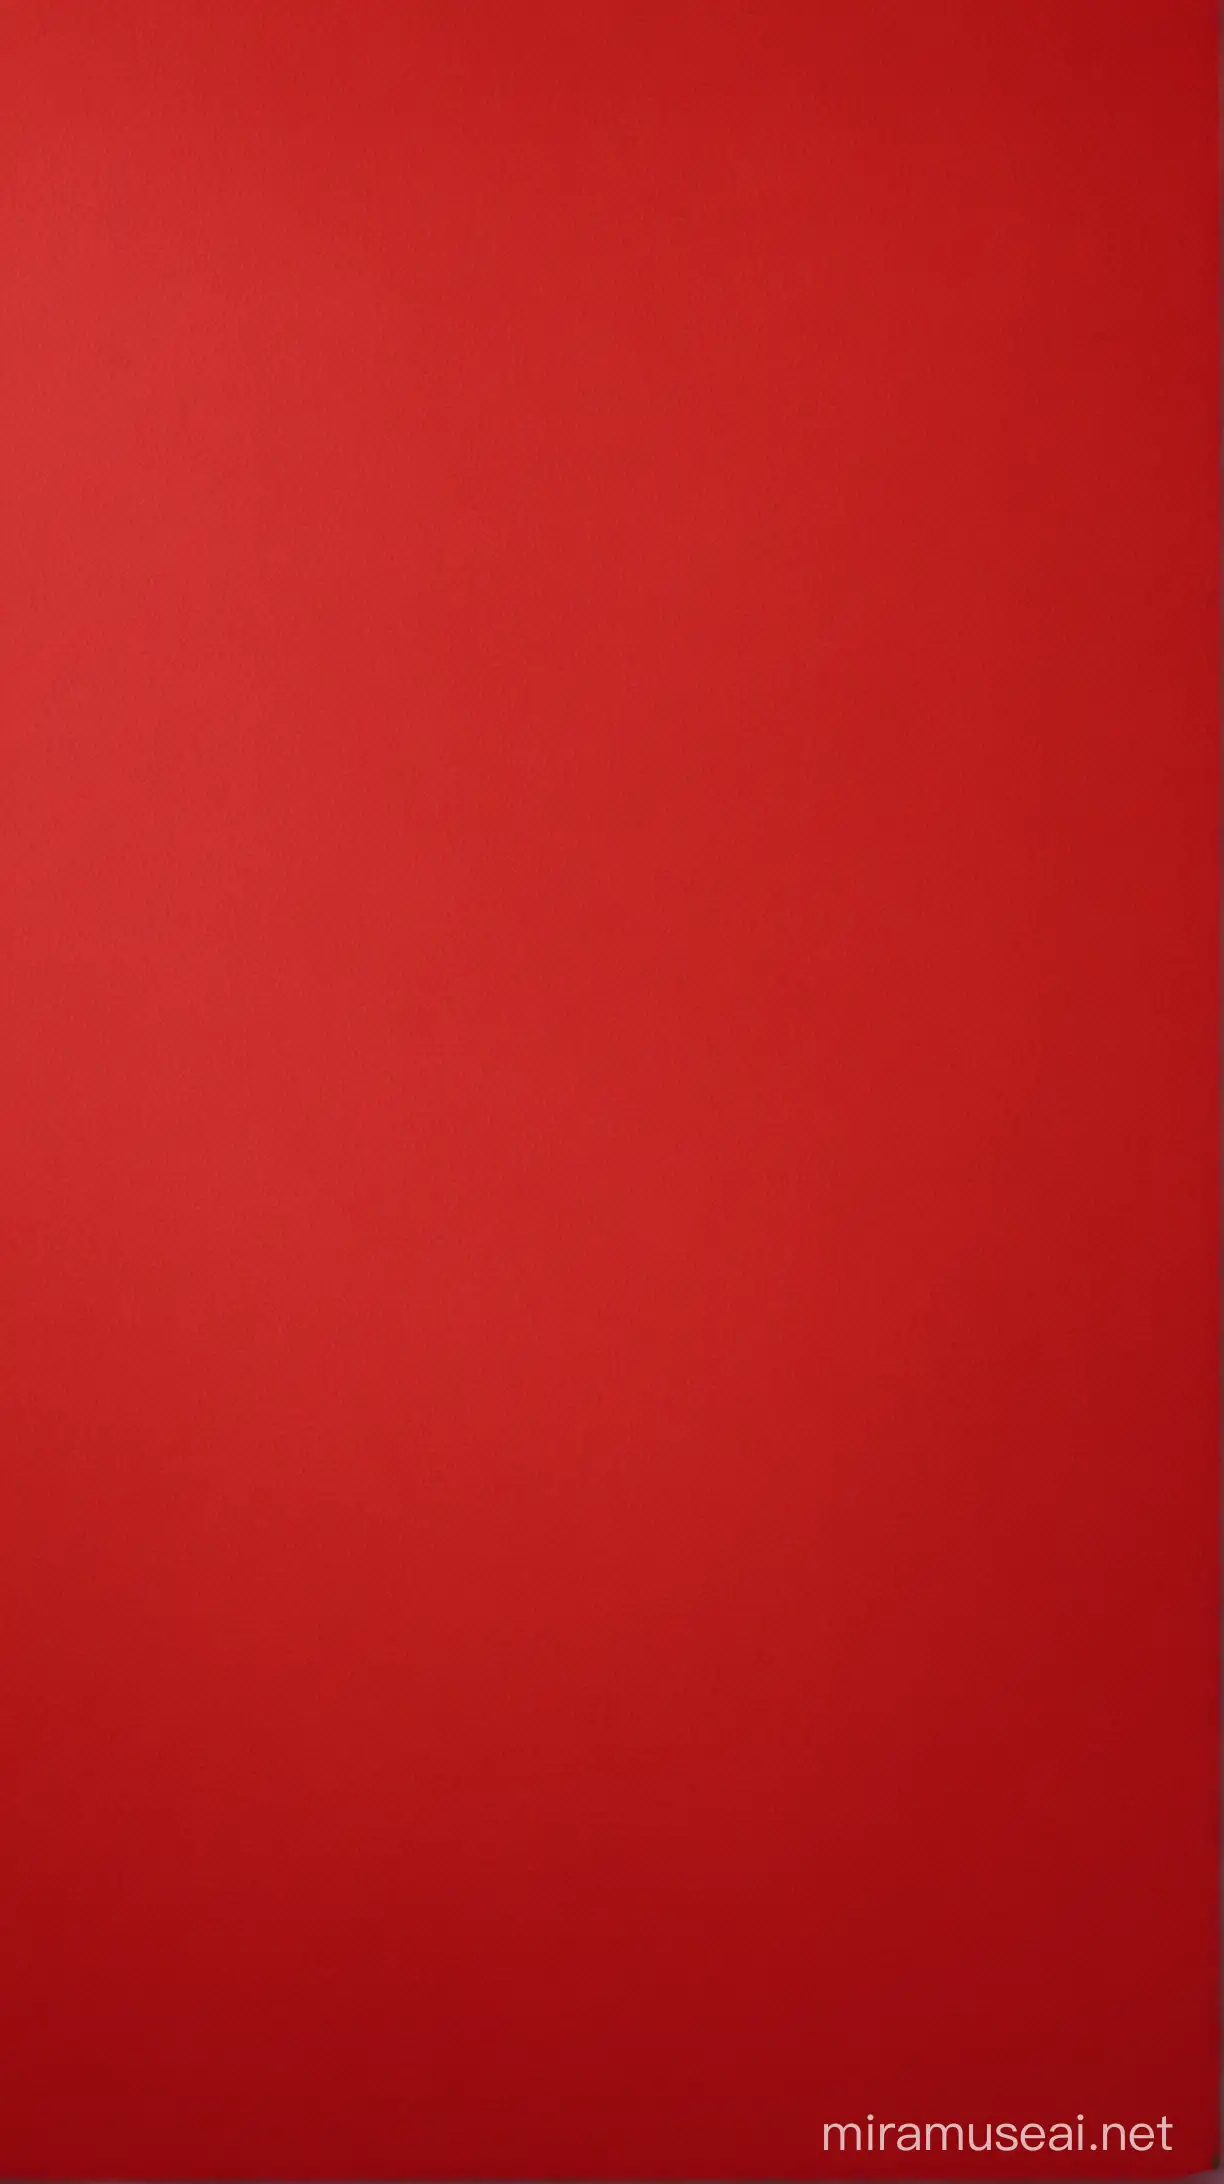 Vibrant Red Abstract Background with Dynamic Movement